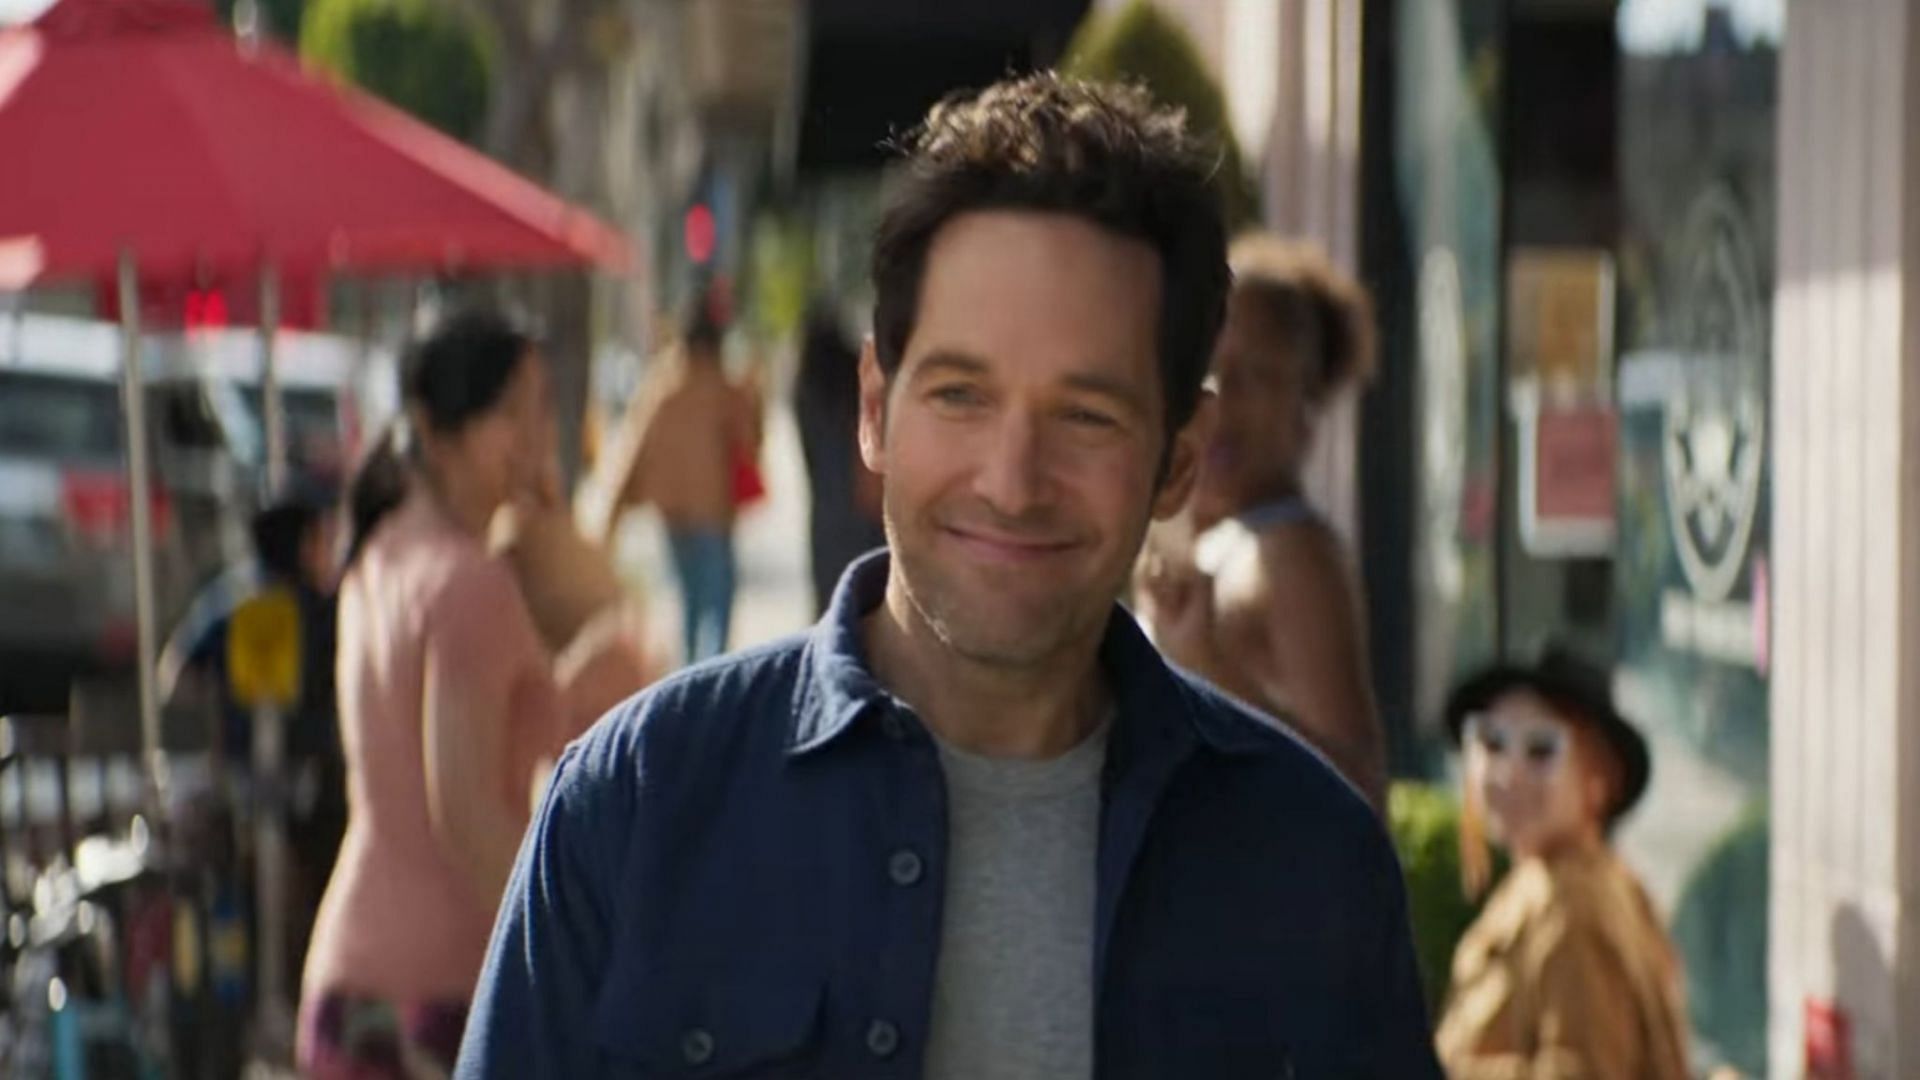 Is Scott Lang going to help Kang? Breaking down the first trailer for Ant-Man and the Wasp: Quantumania